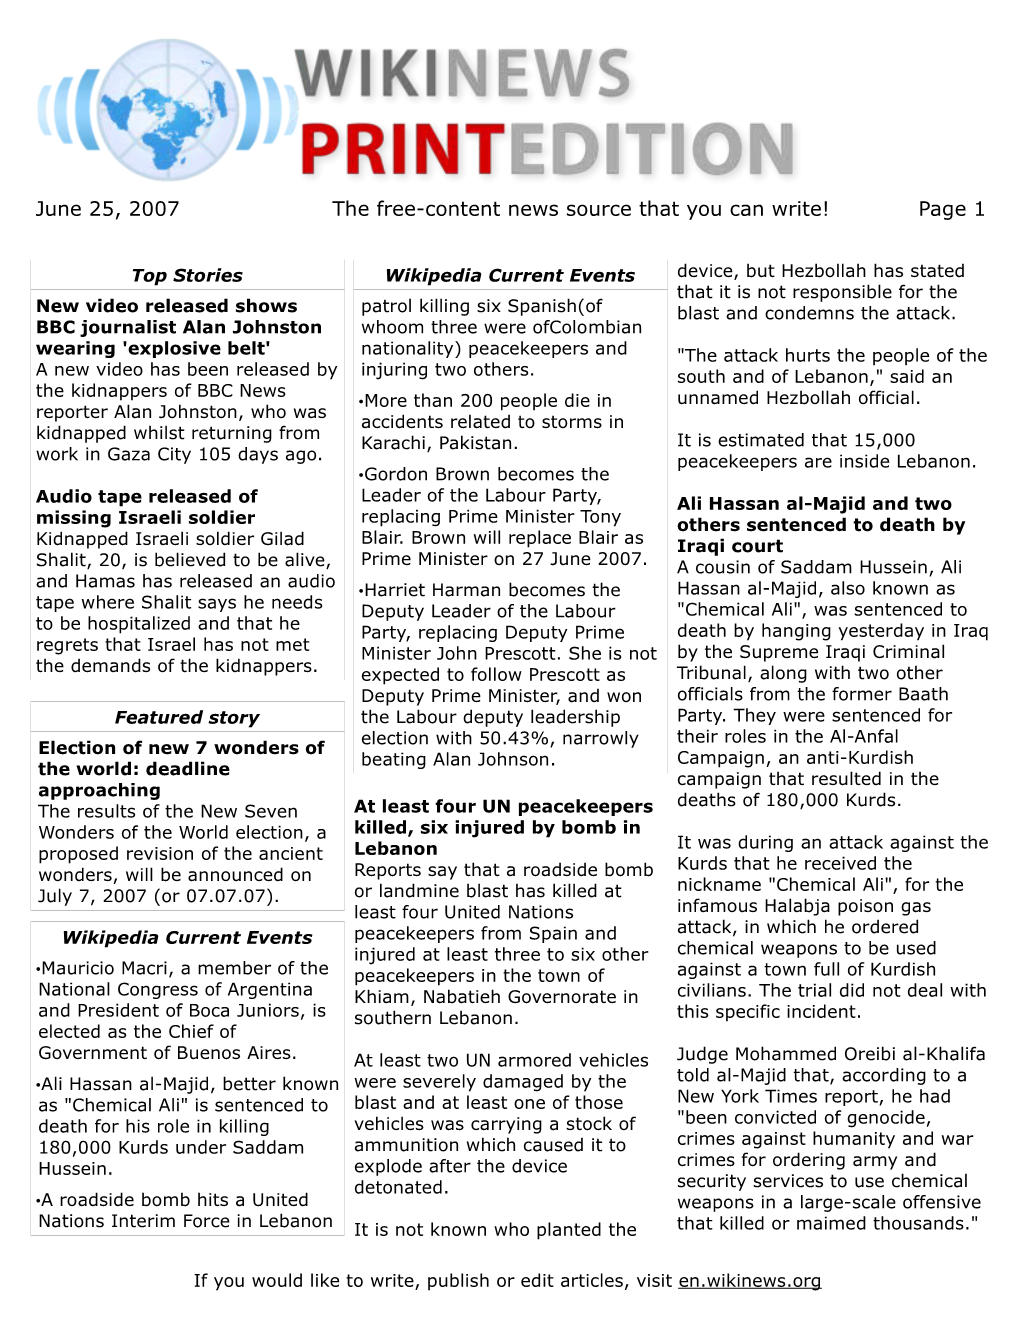 June 25, 2007 the Free-Content News Source That You Can Write! Page 1